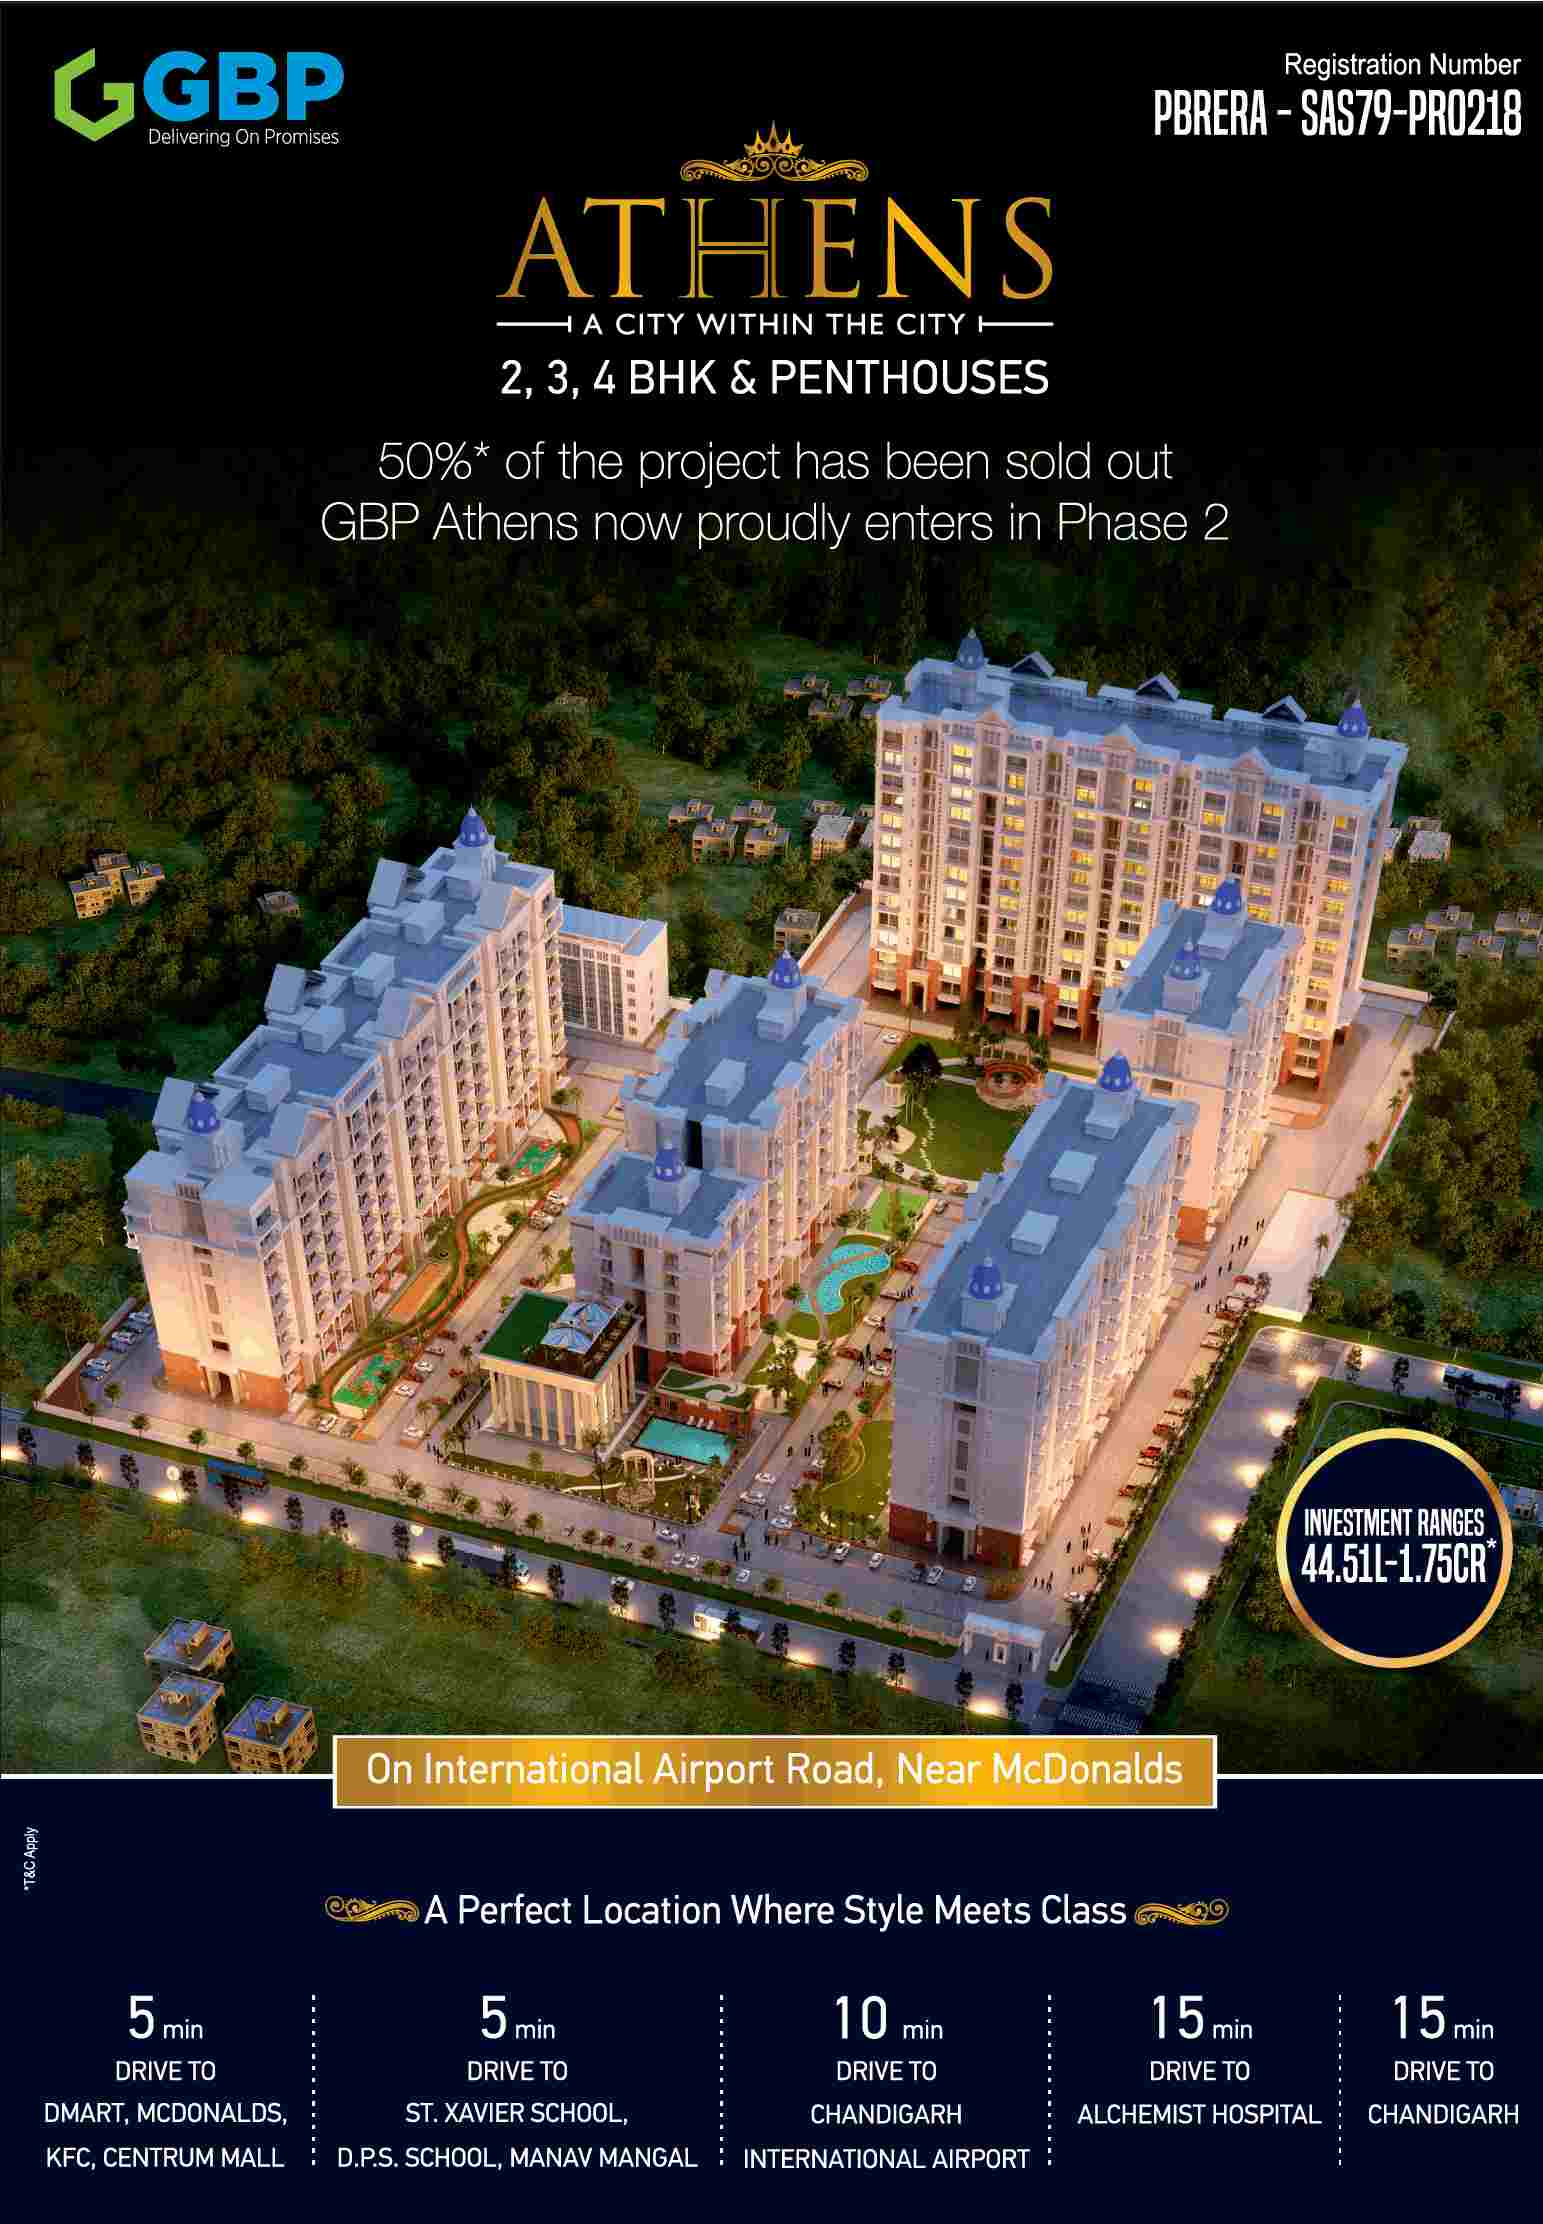 Live in a perfect location where style meets class at GBP Athens in Chandigarh